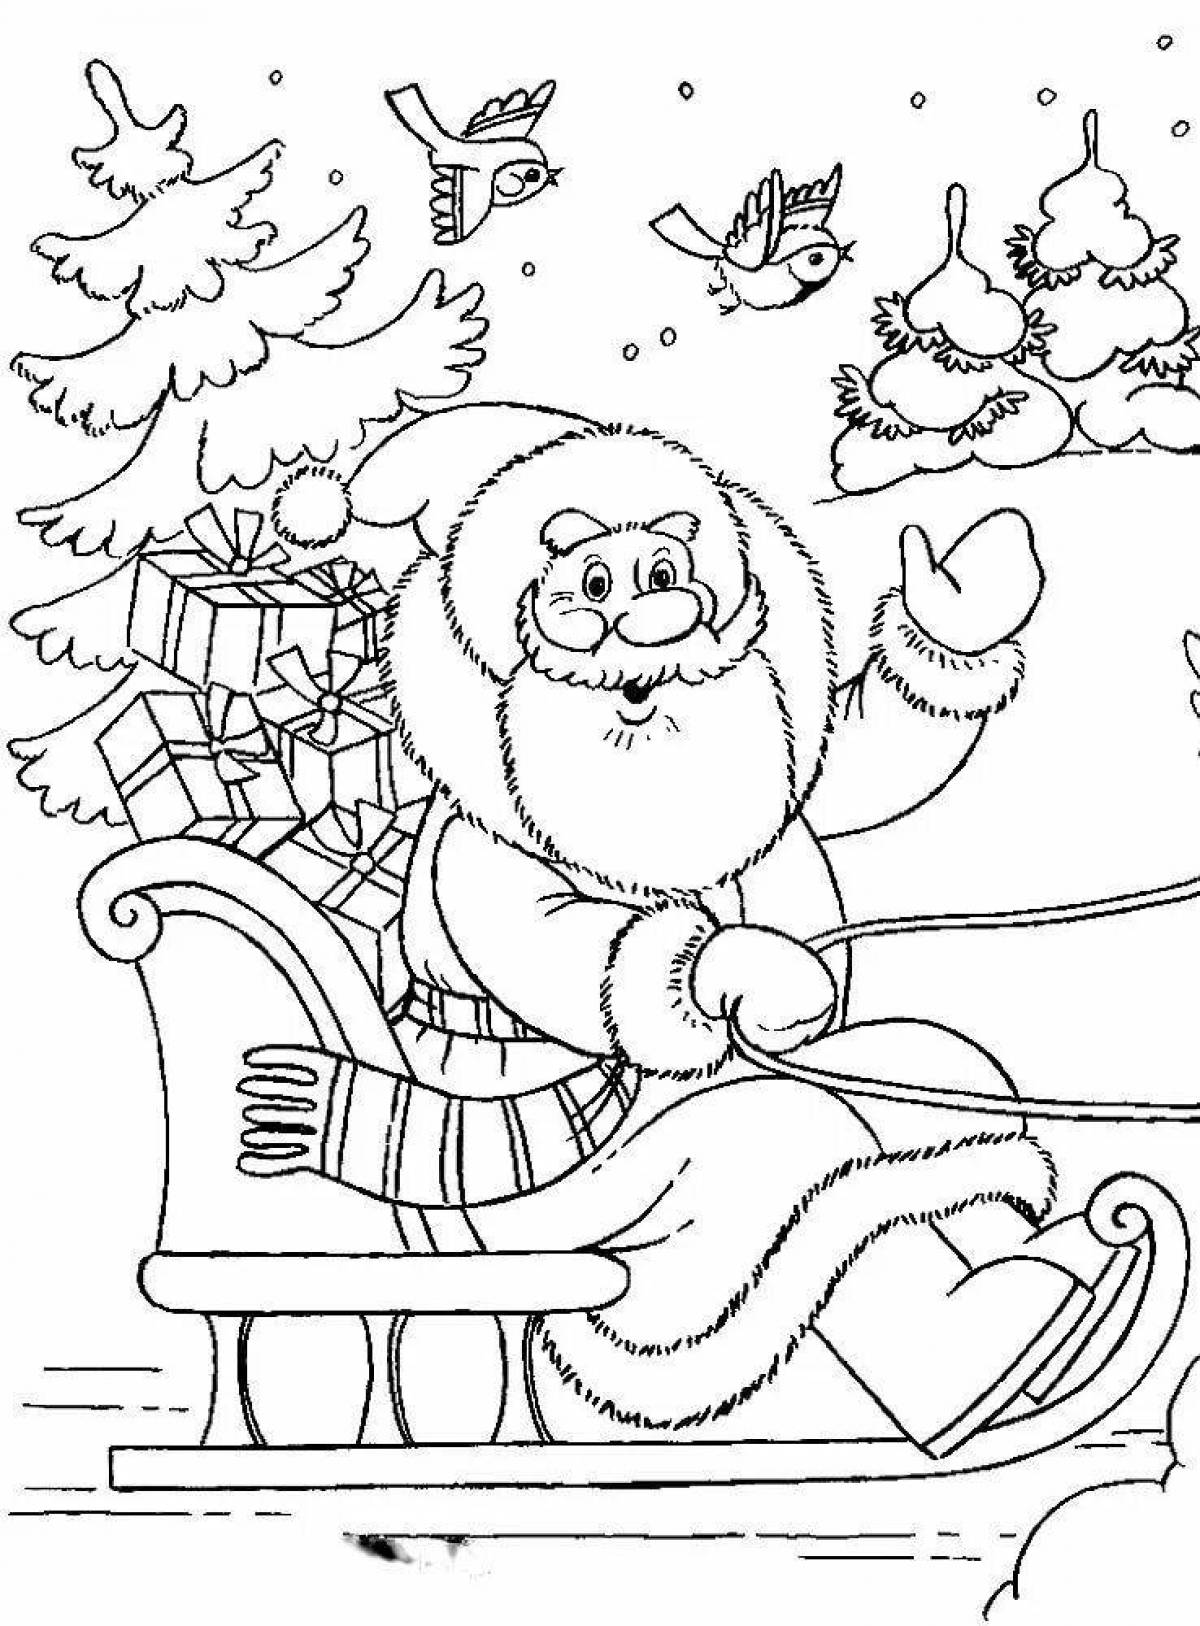 Coloring page happy santa claus on sleigh